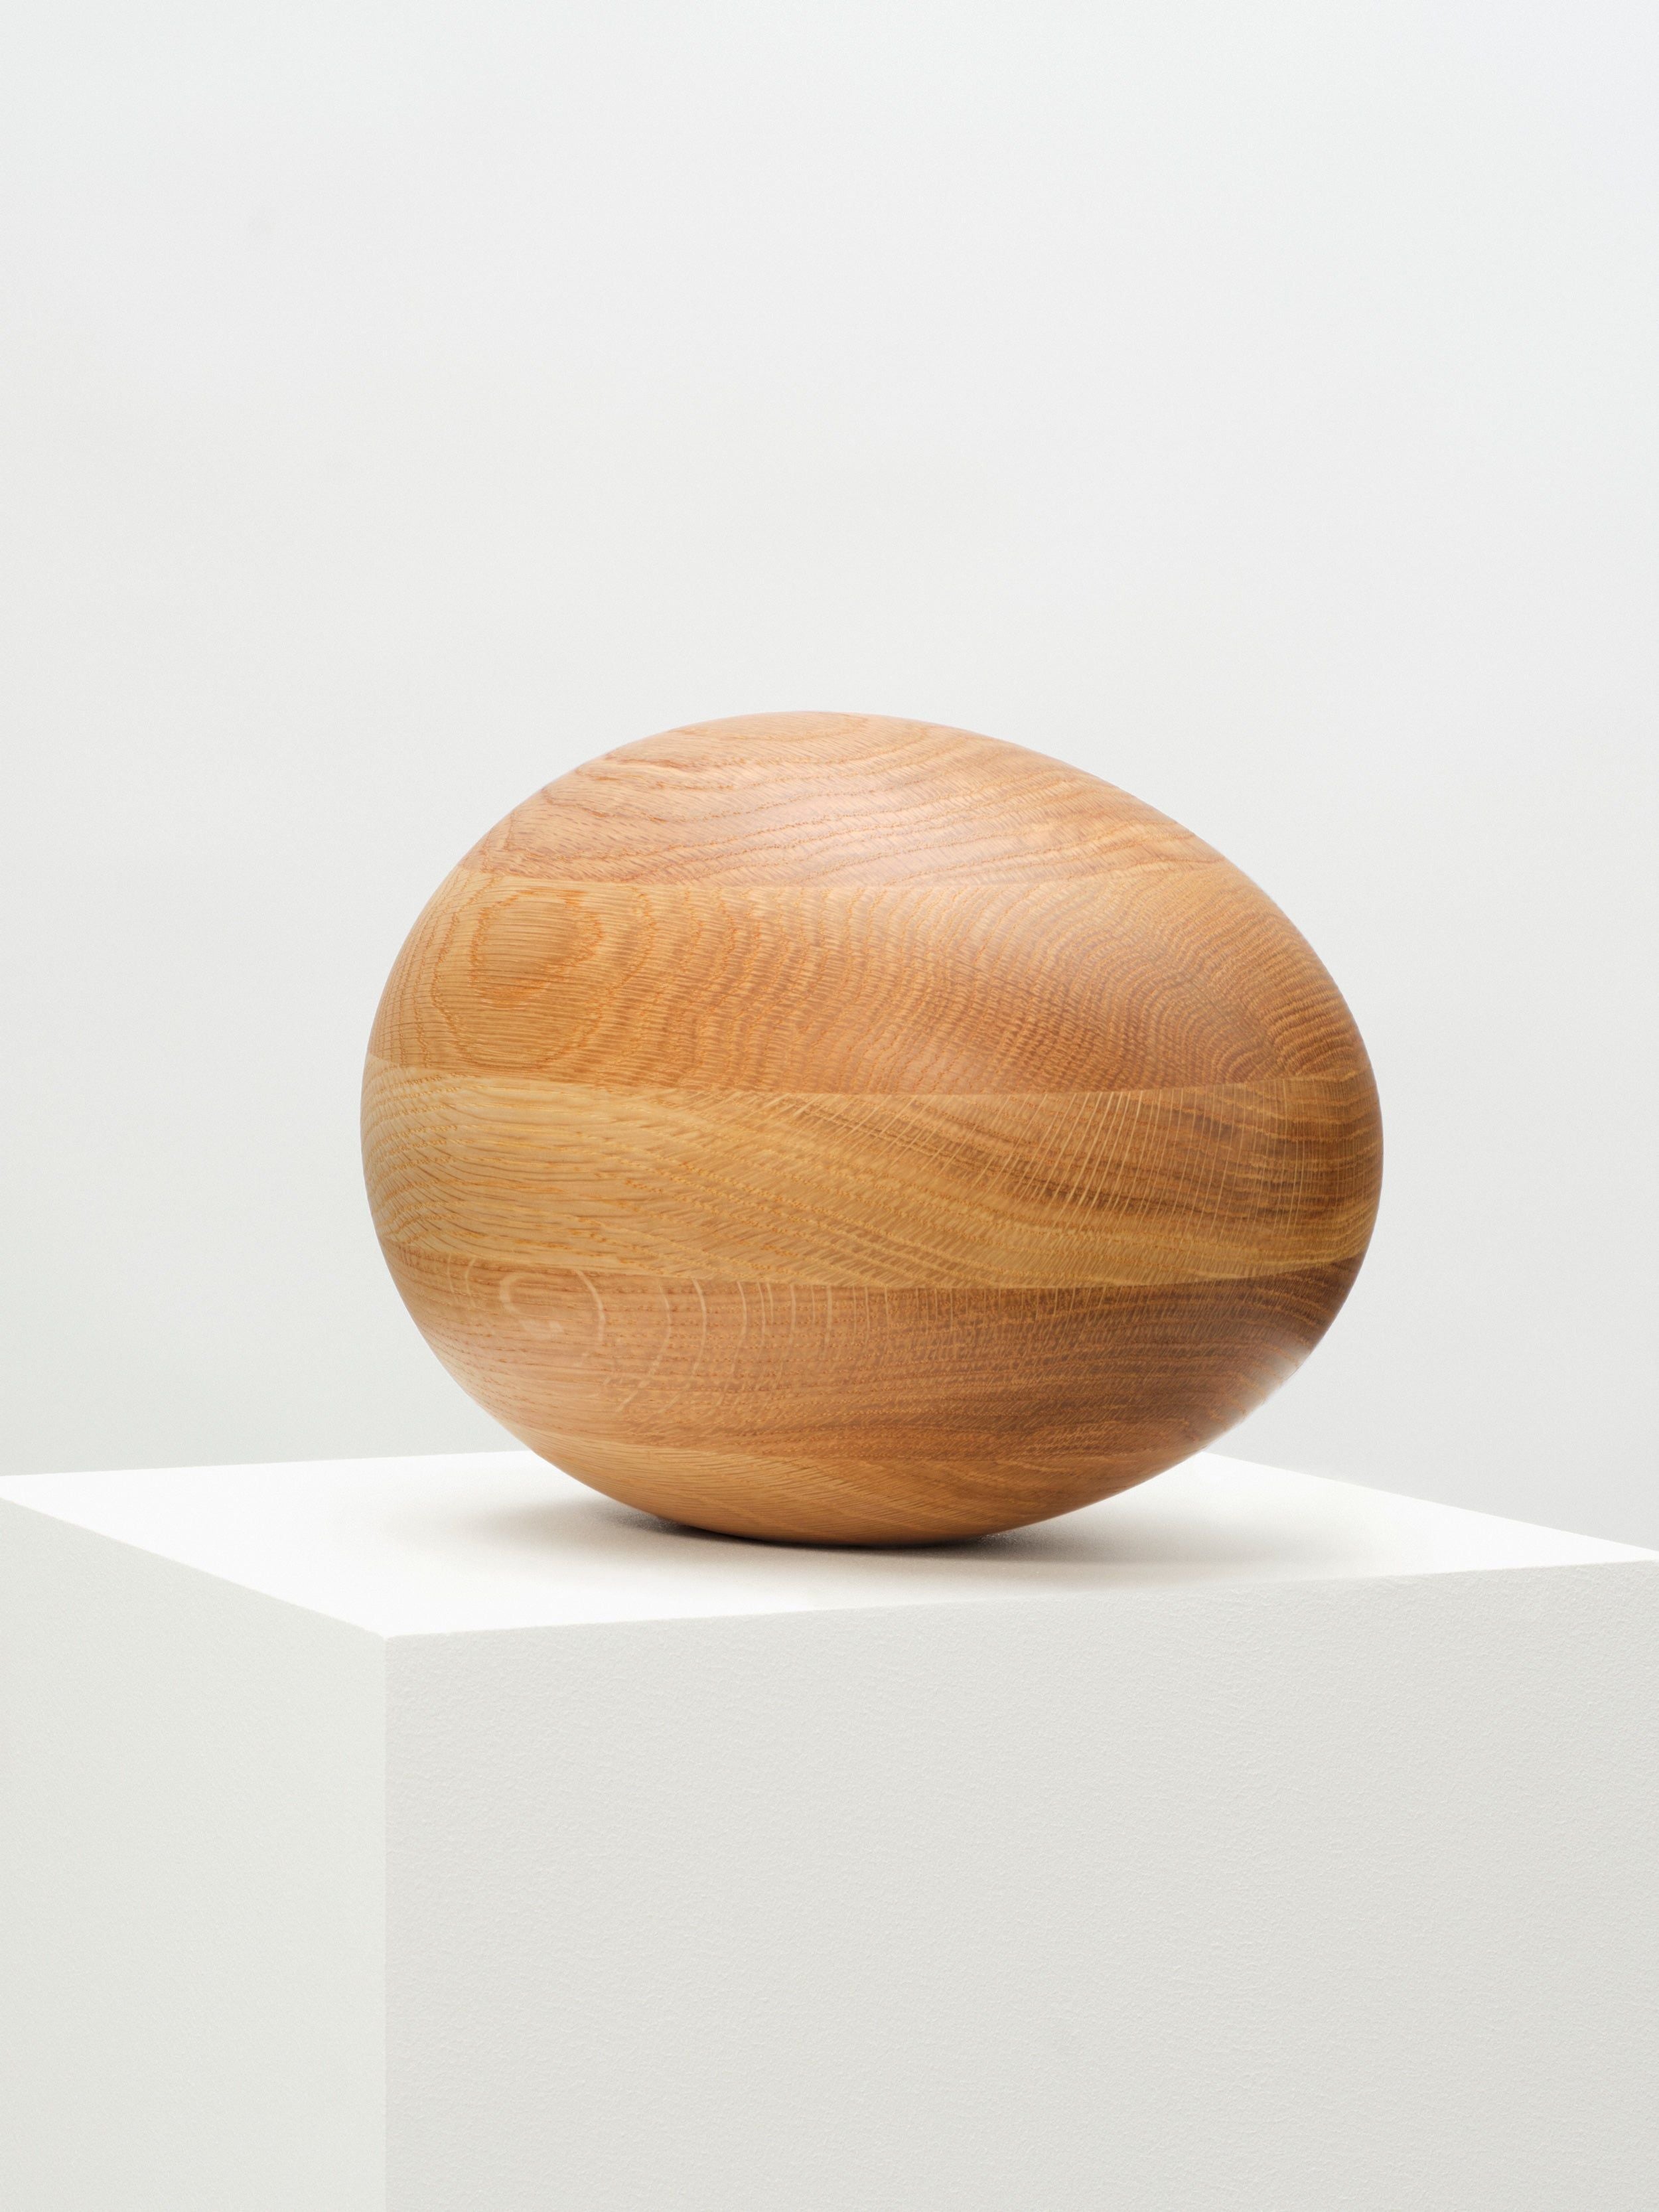 Close-up of the Natural Oak Egg Sculpture showing the wood grain and texture